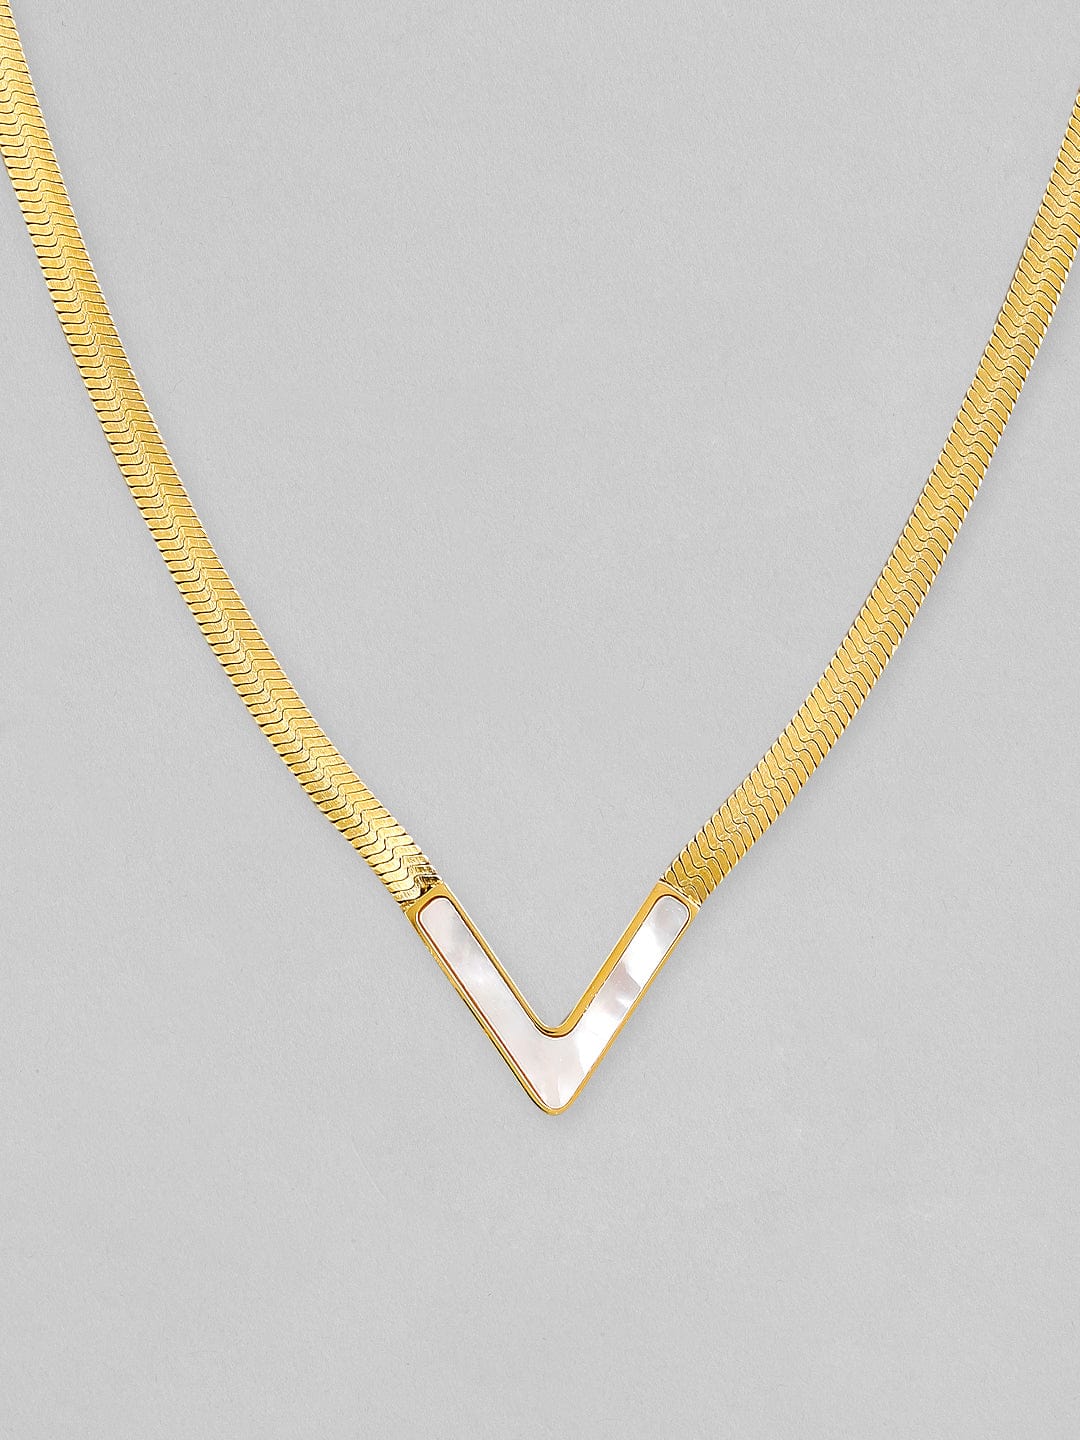 Rubans Voguish 18K Gold Plated Stainless Steel Waterproof Snake Chain With V Shaped Shell Pendant. Chain & Necklaces